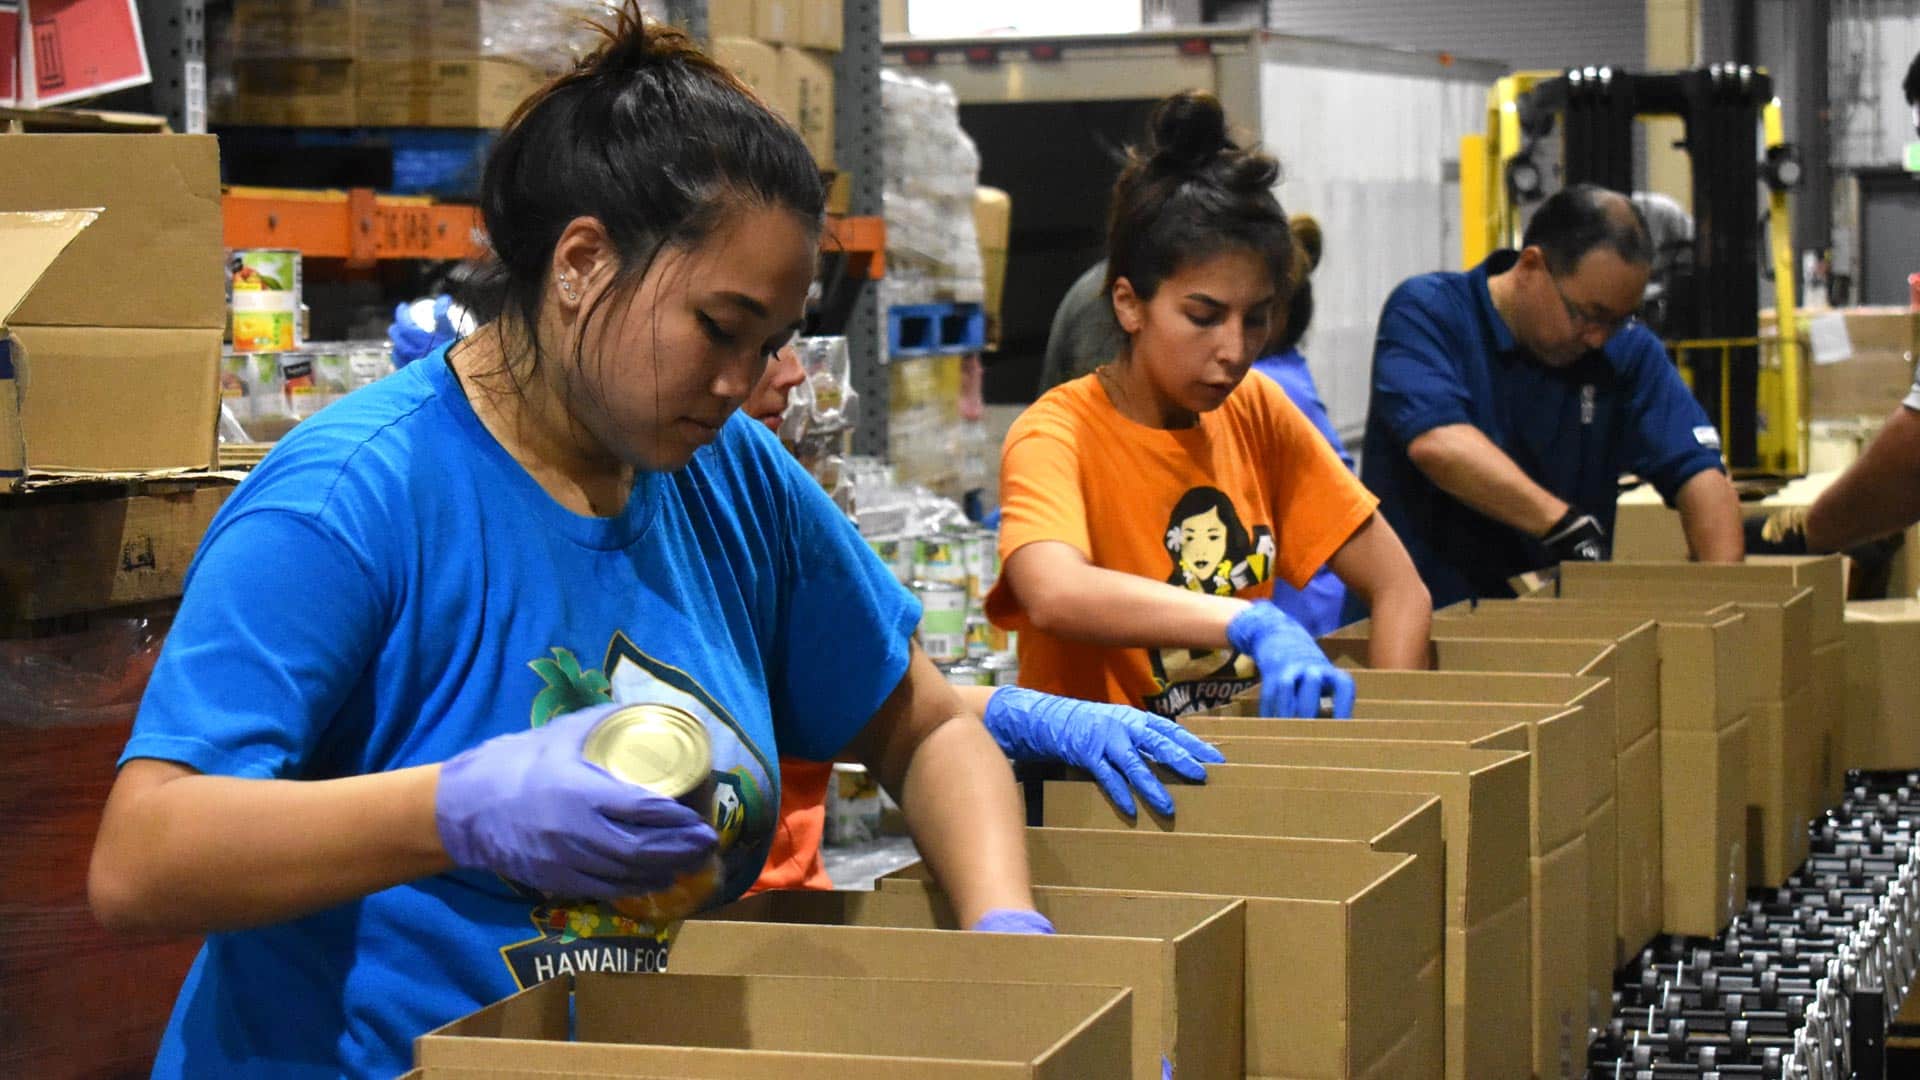 Hawaii Foodbank staff meticulously inspecting and preparing food items for distribution in Oahu's food bank warehouse.